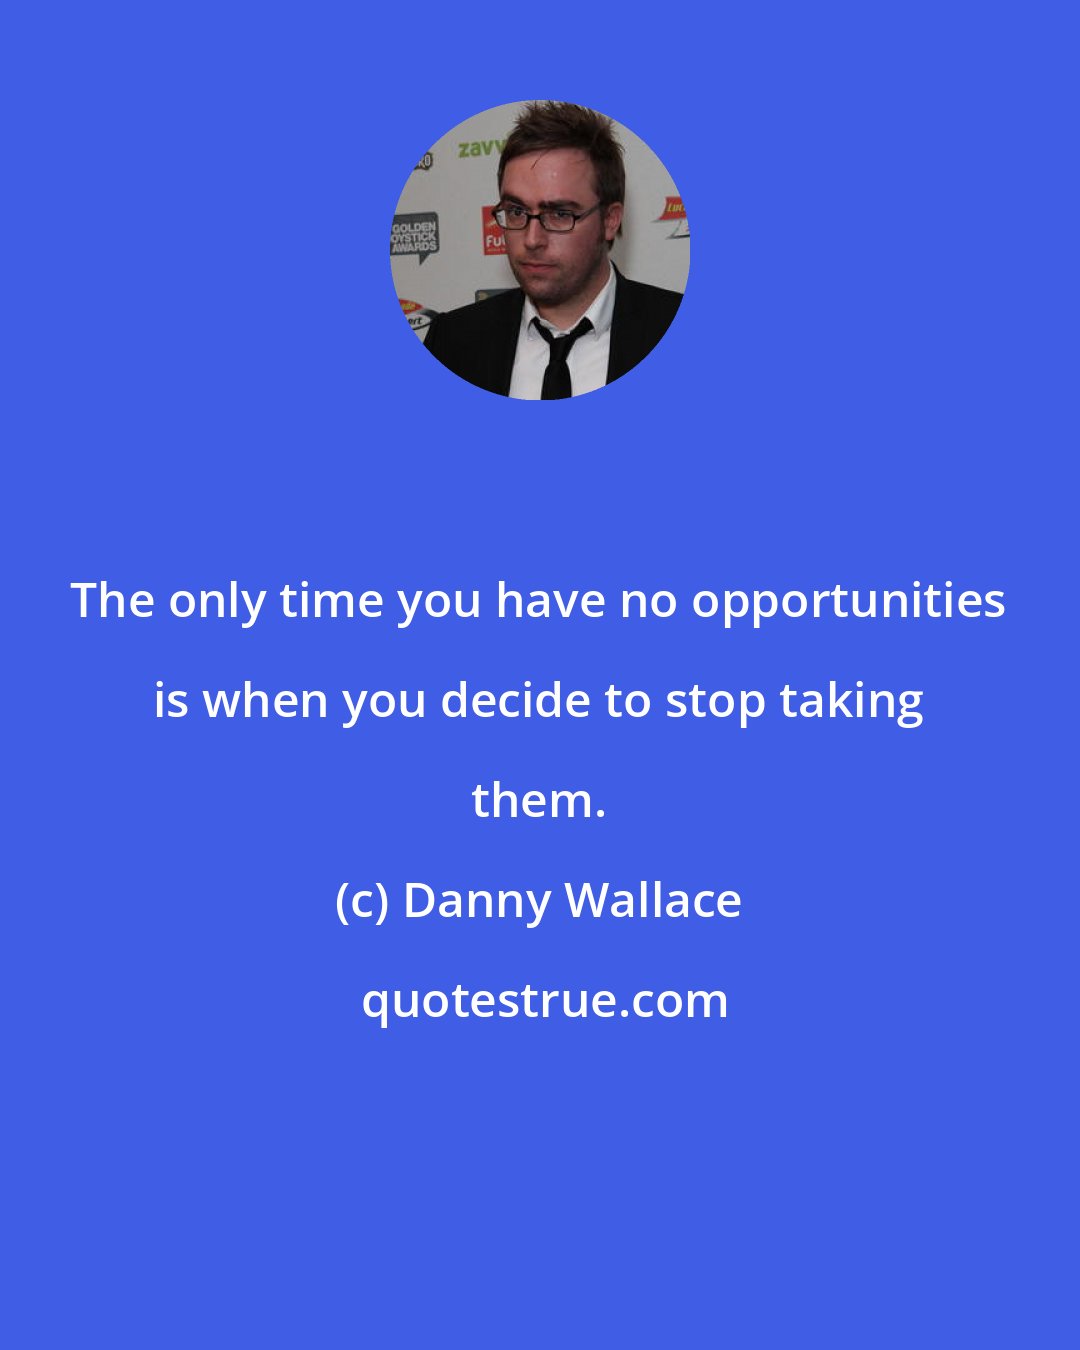 Danny Wallace: The only time you have no opportunities is when you decide to stop taking them.